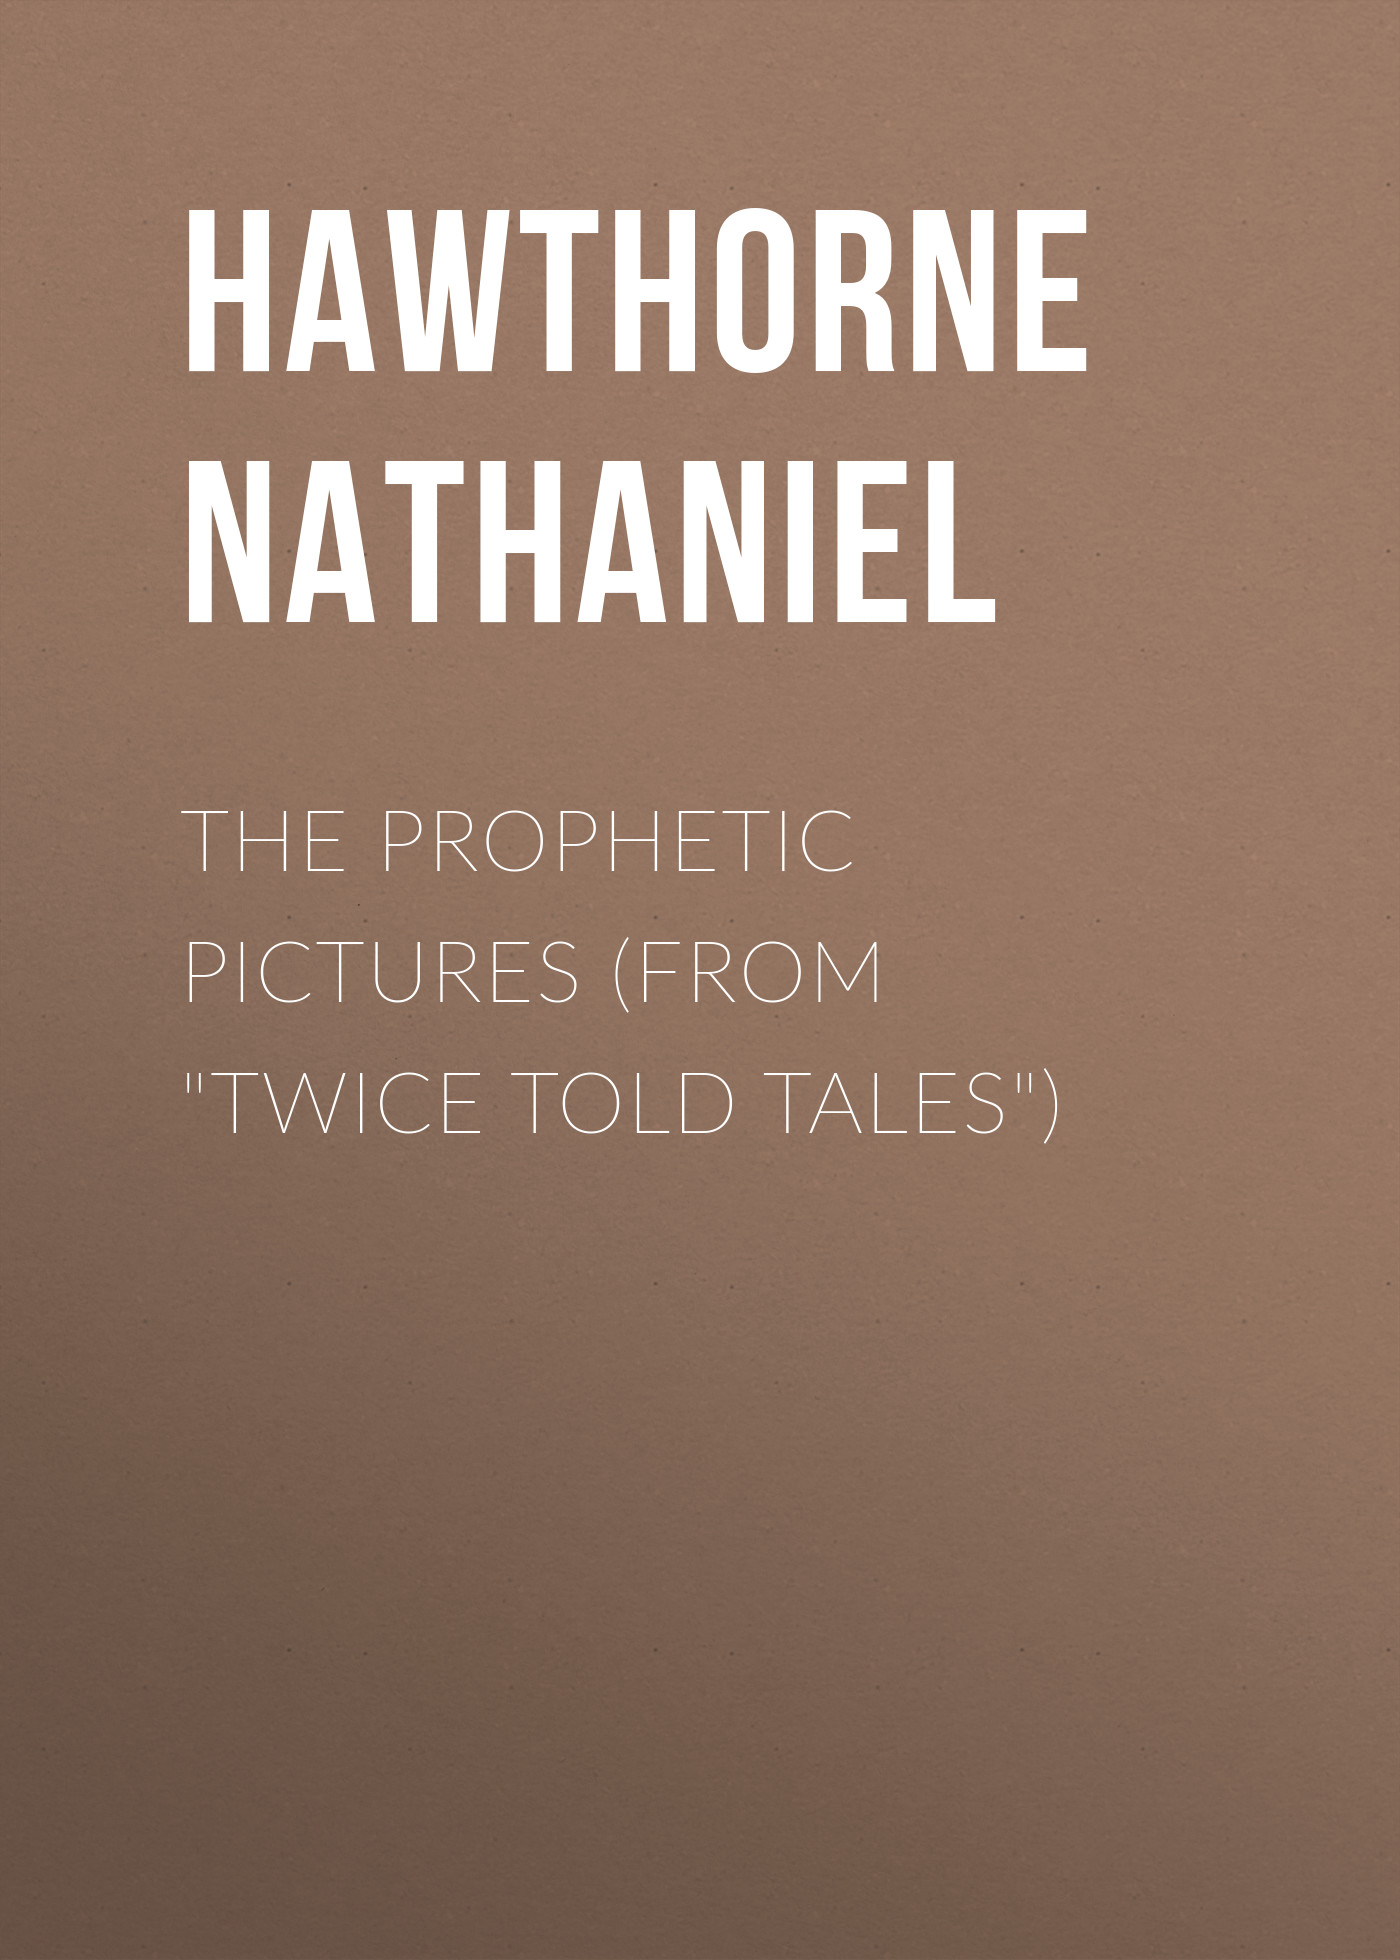 The Prophetic Pictures (From"Twice Told Tales")